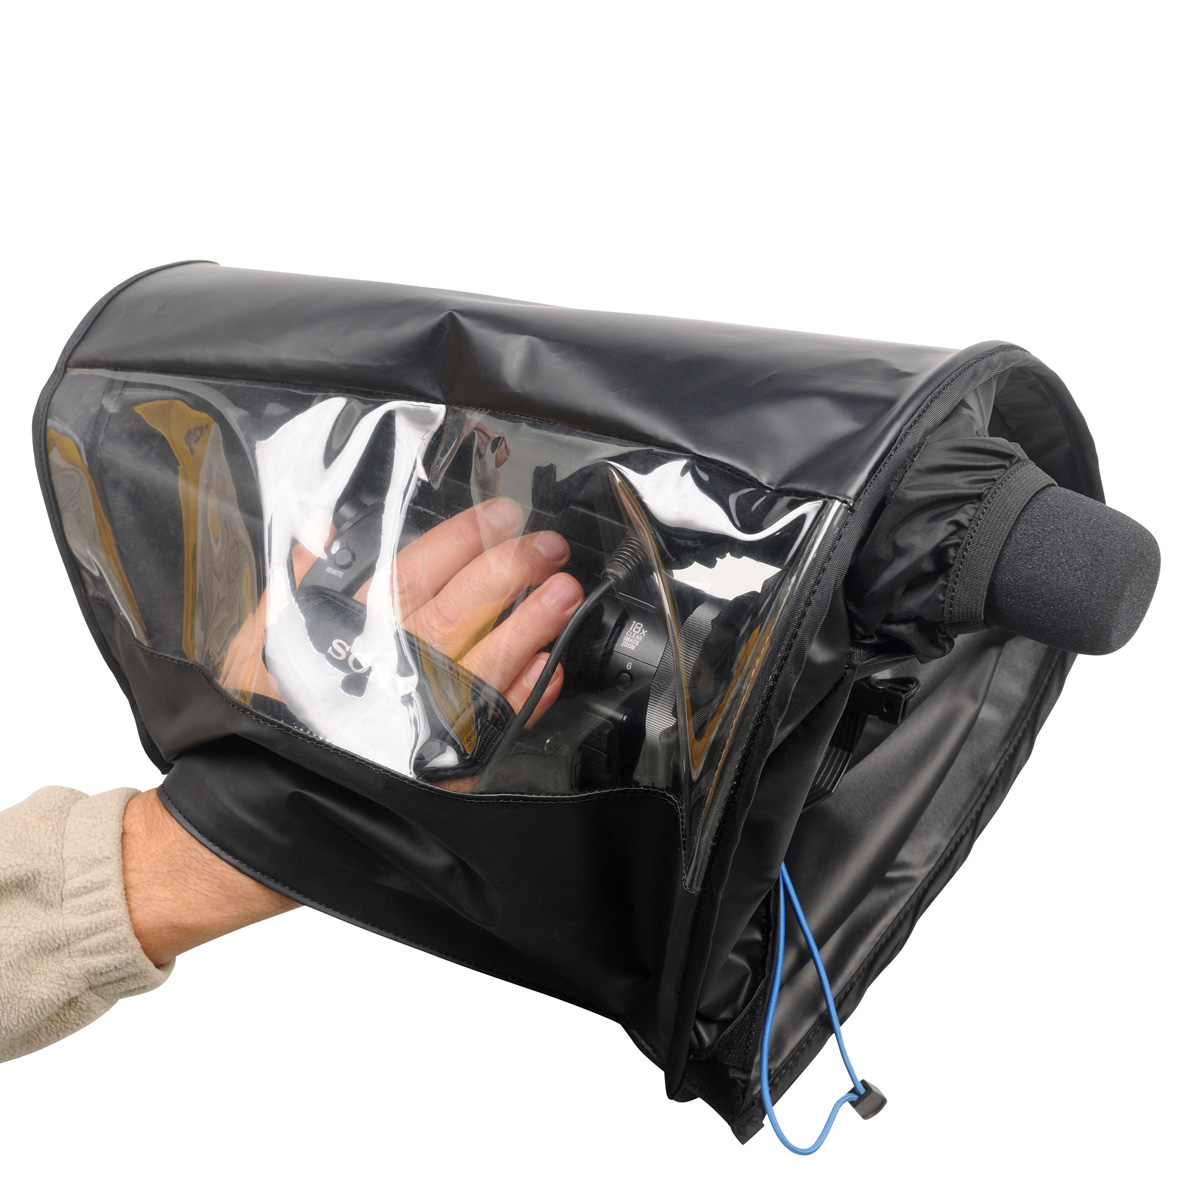 Orca OR-101 Quick Rain Cover for extra small video cameras